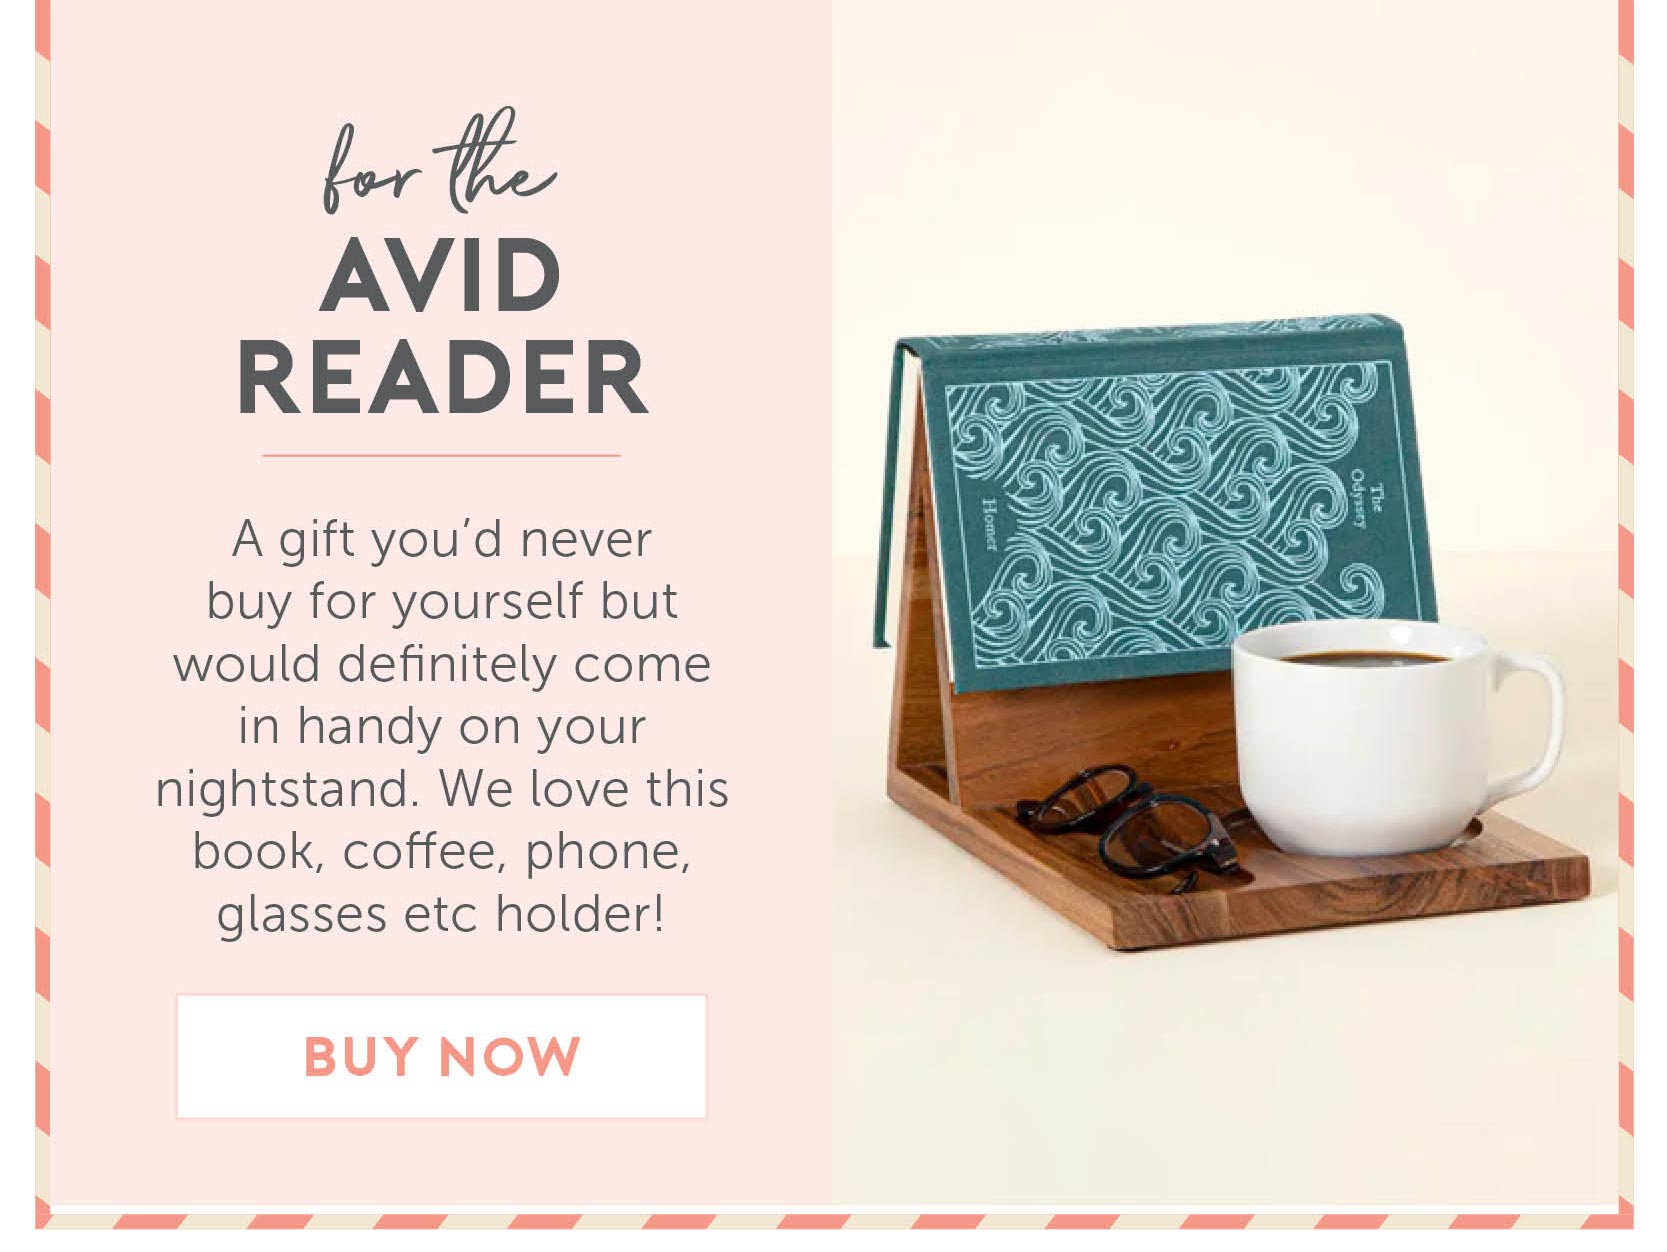 For the avid reader. A gift you’d never buy for yourself but would definitely come in handy on your nightstand. We love this book, coffee, phone, glasses etc holder!.